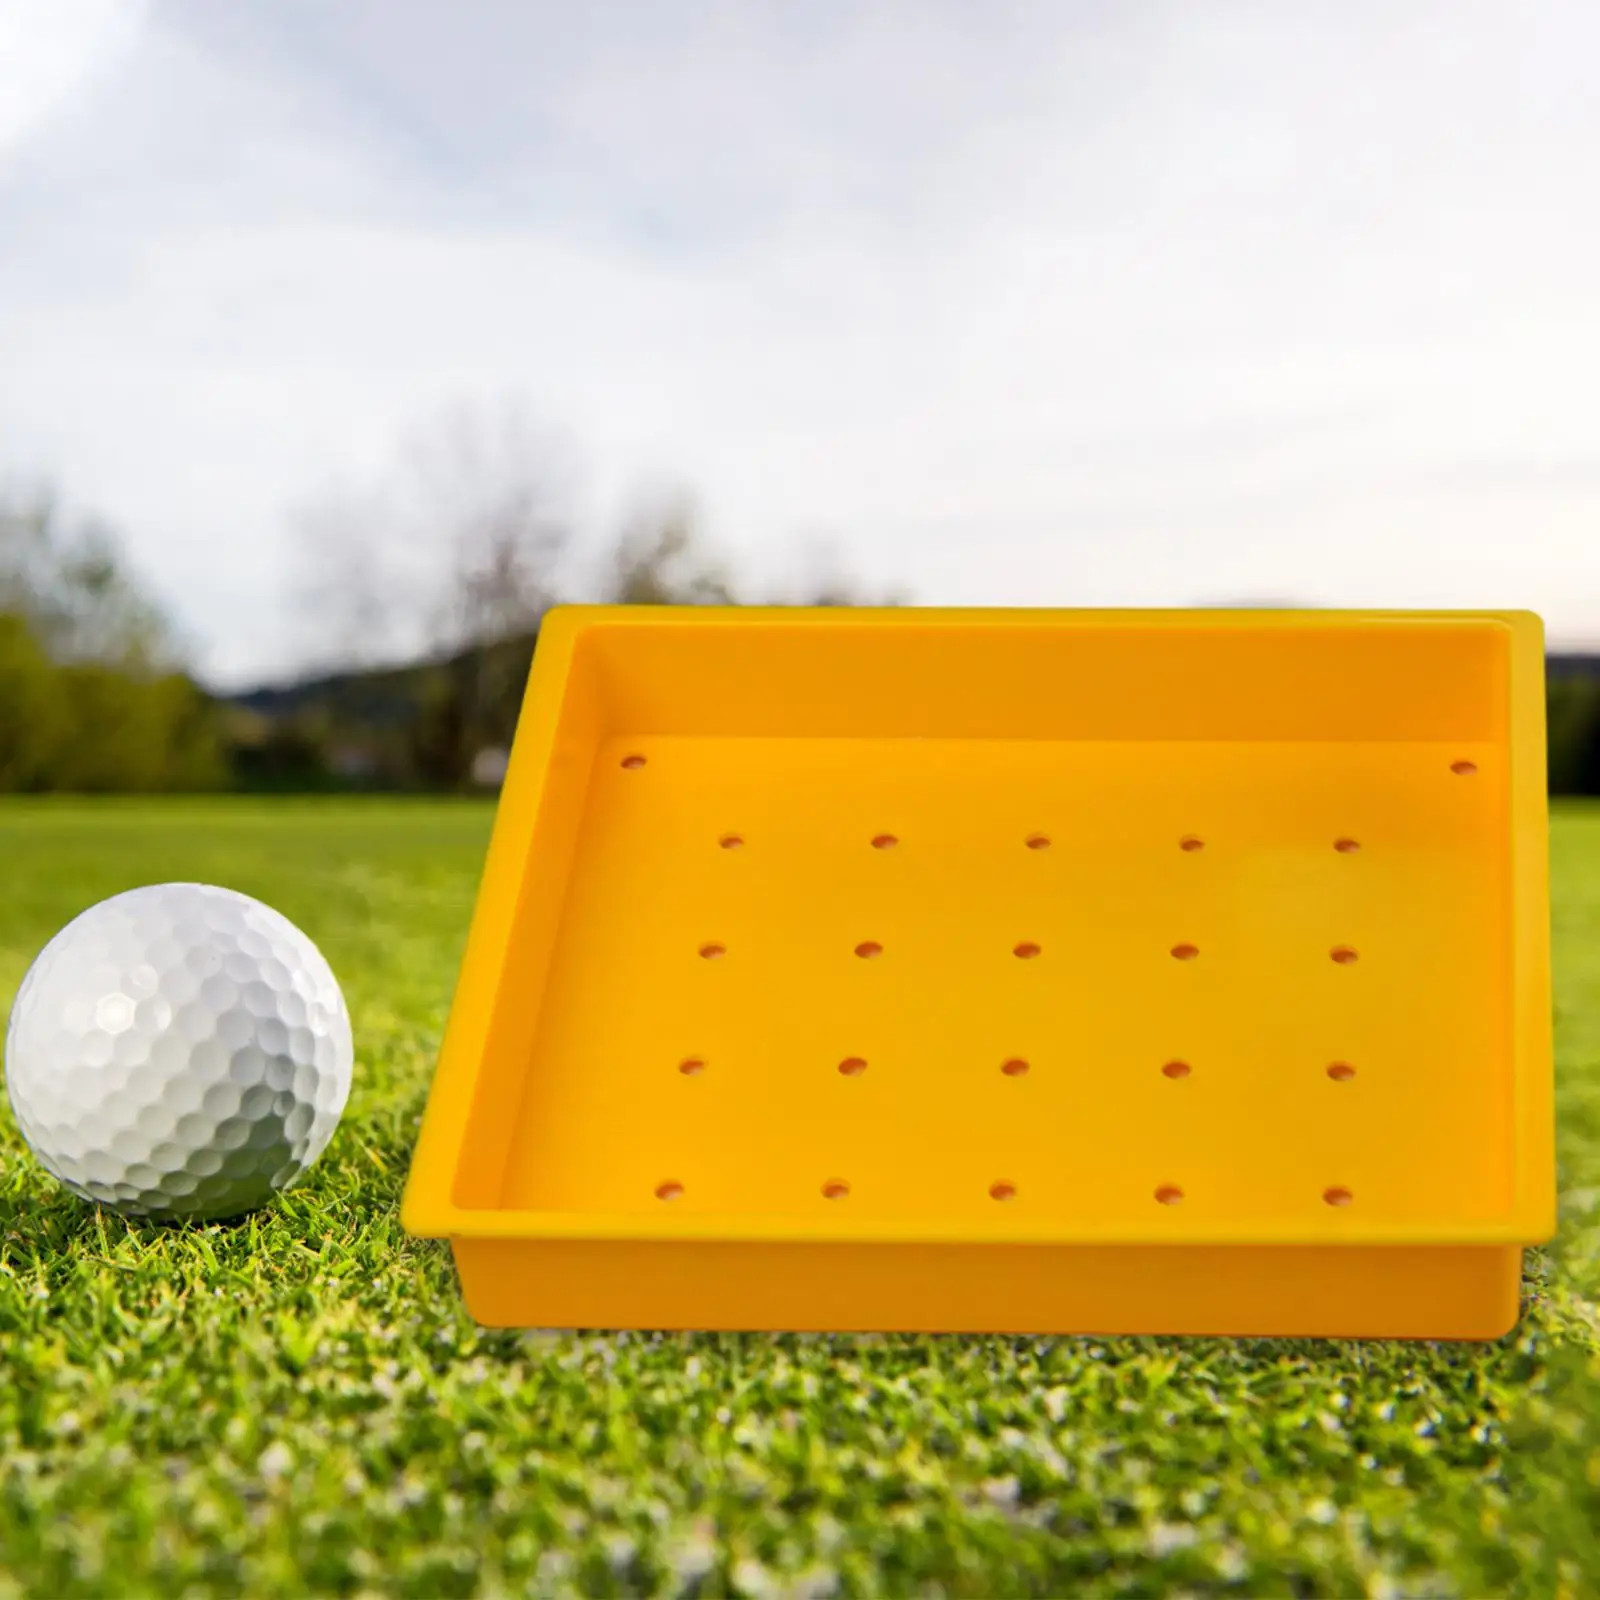 Large Container Golfball Golfing  Ball Tray Organizer Case Hold 30